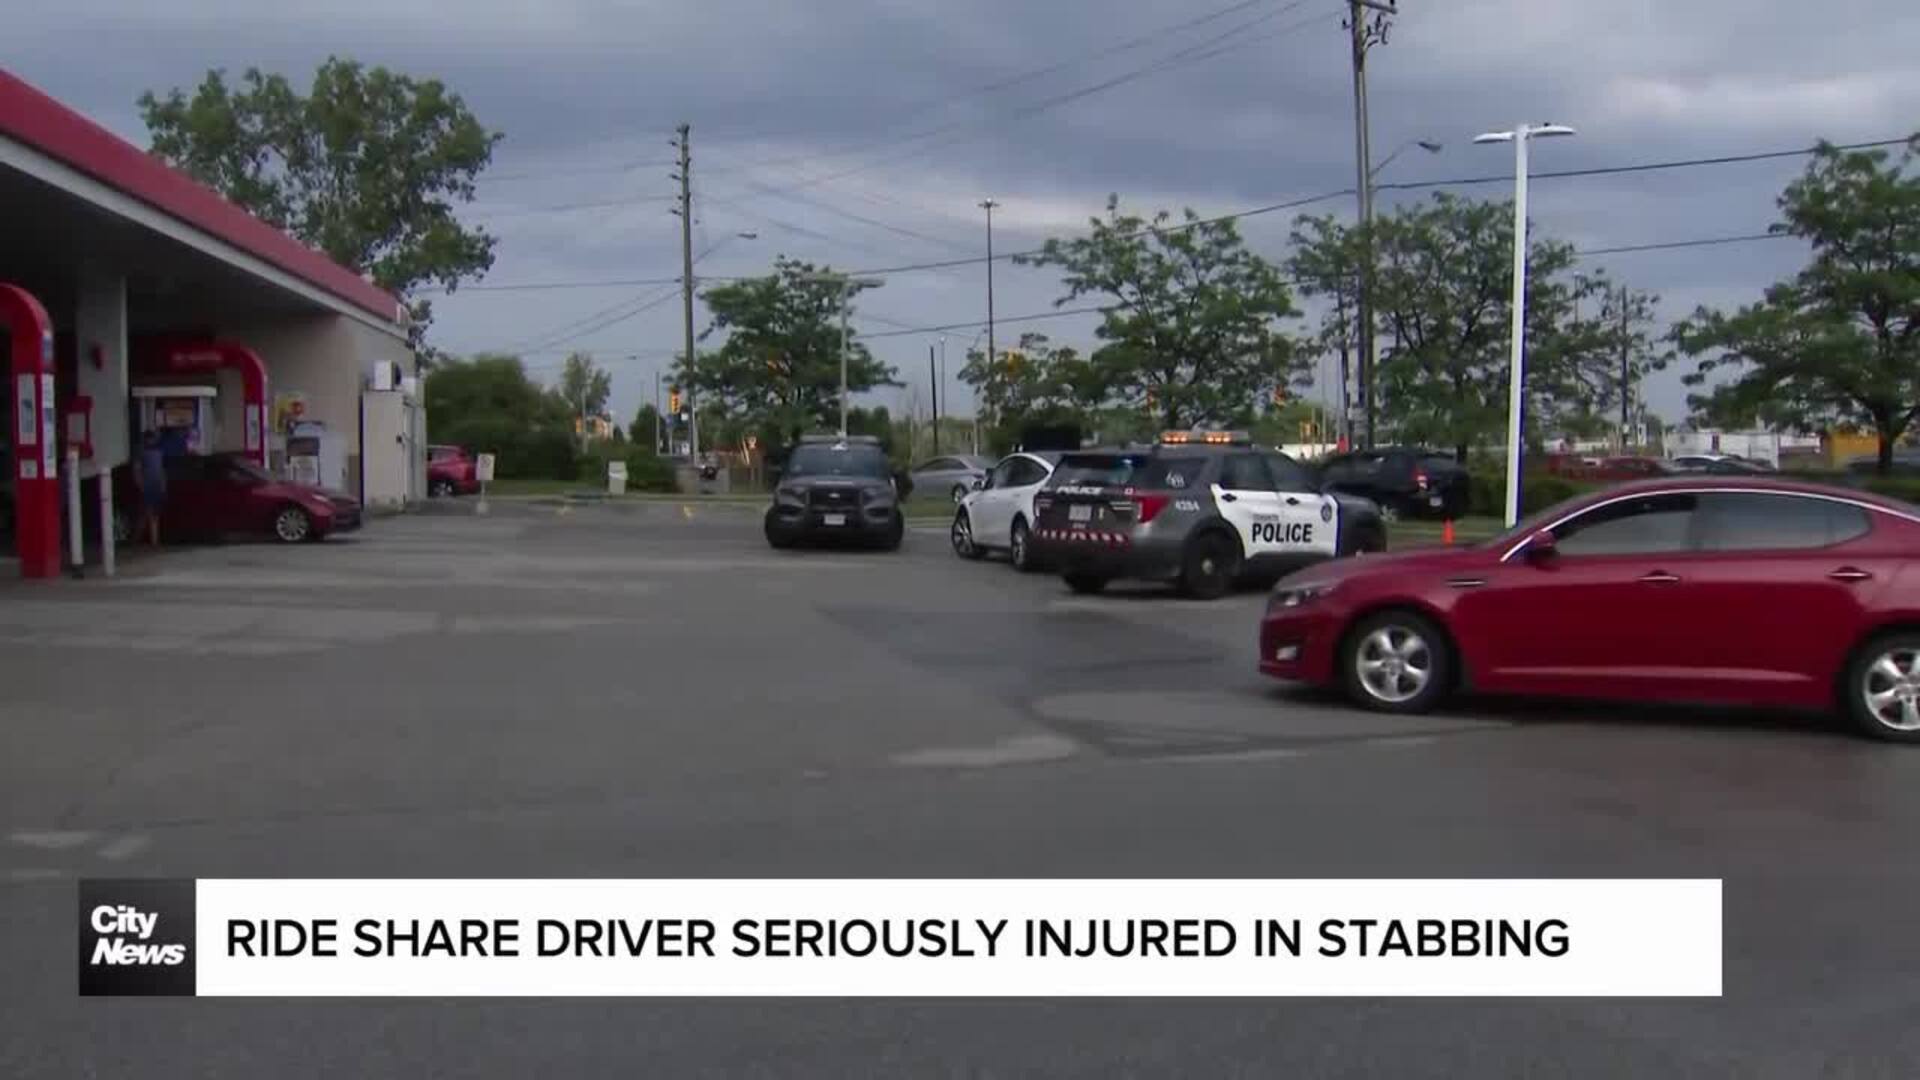 Ride share driver injured in stabbing